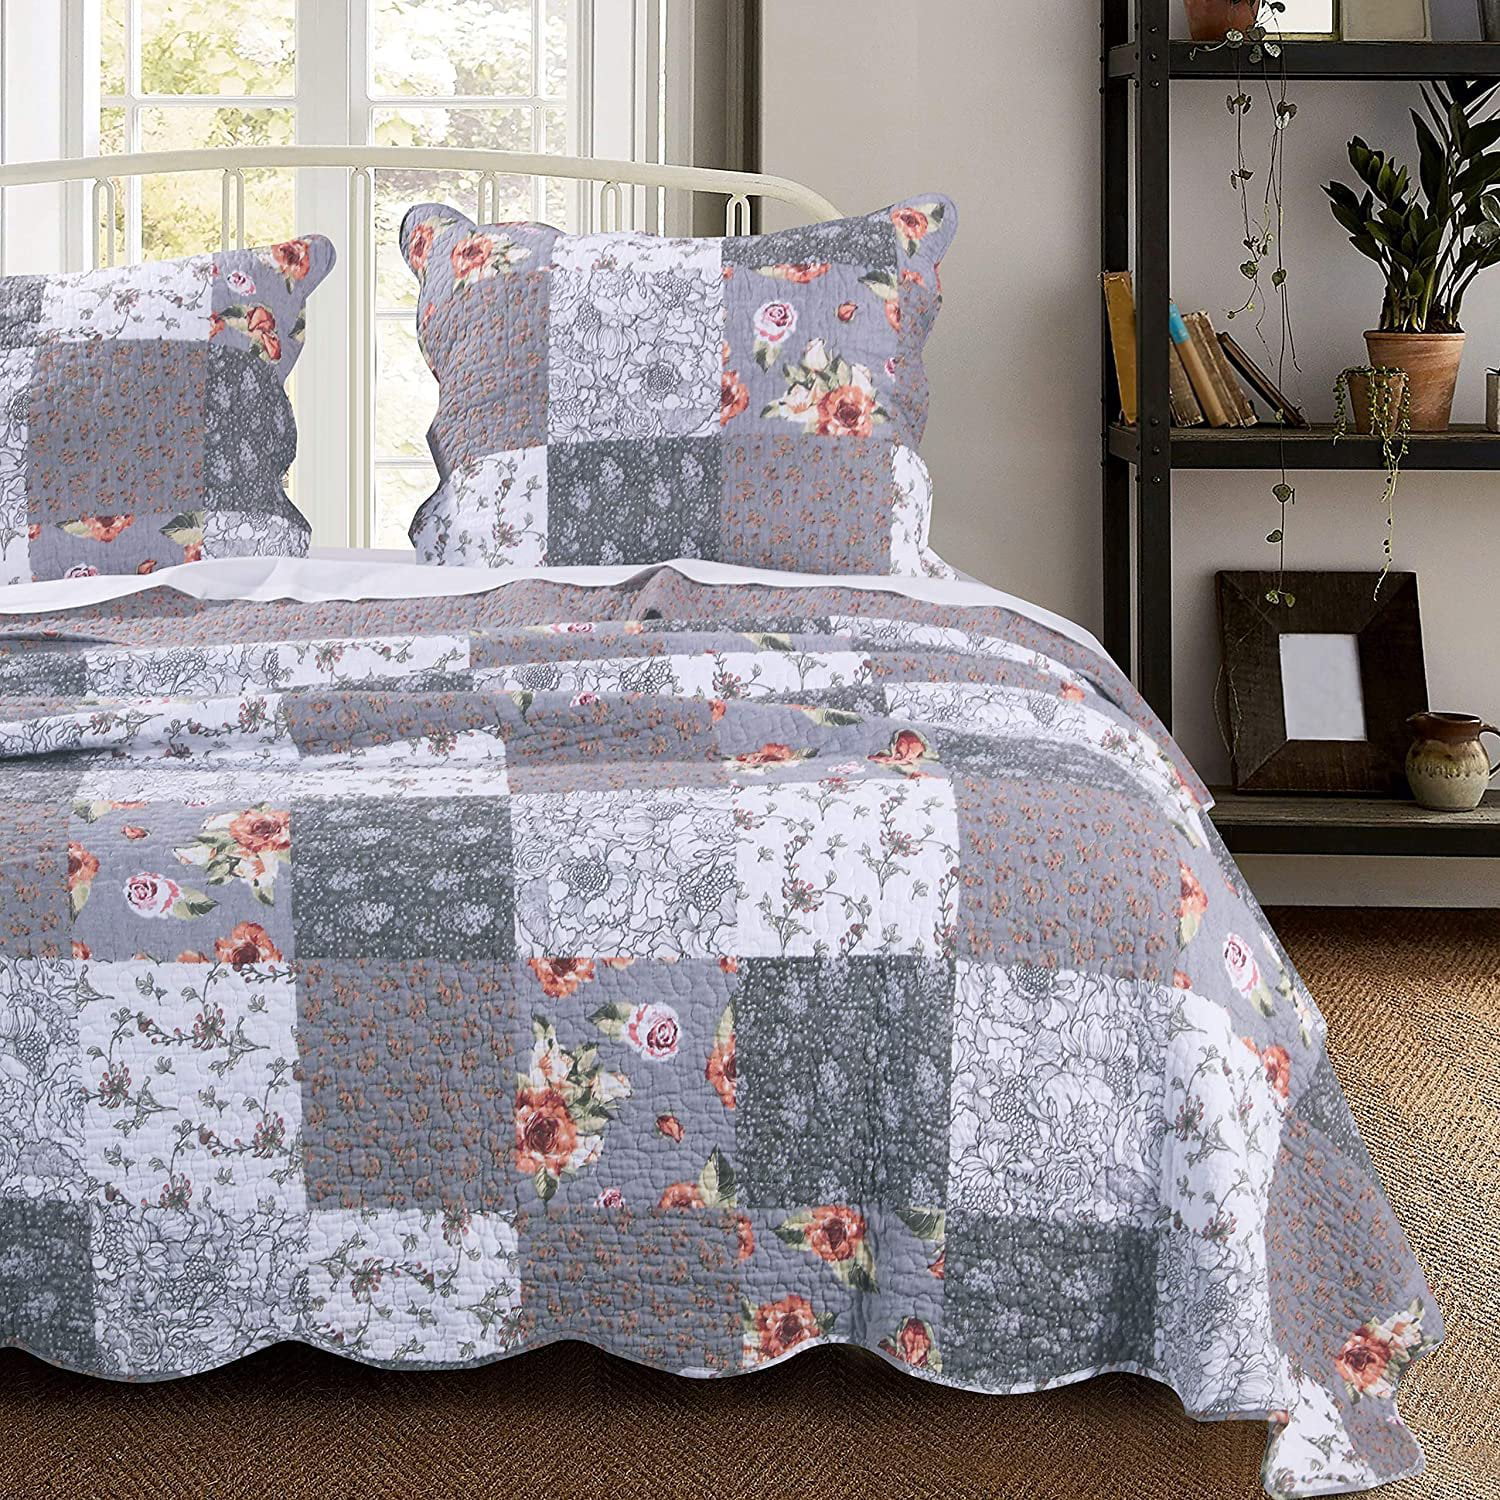 Checked Quilted Patchwork Coverlet Queen/King Size Bedspreads Set Throw Rug New 